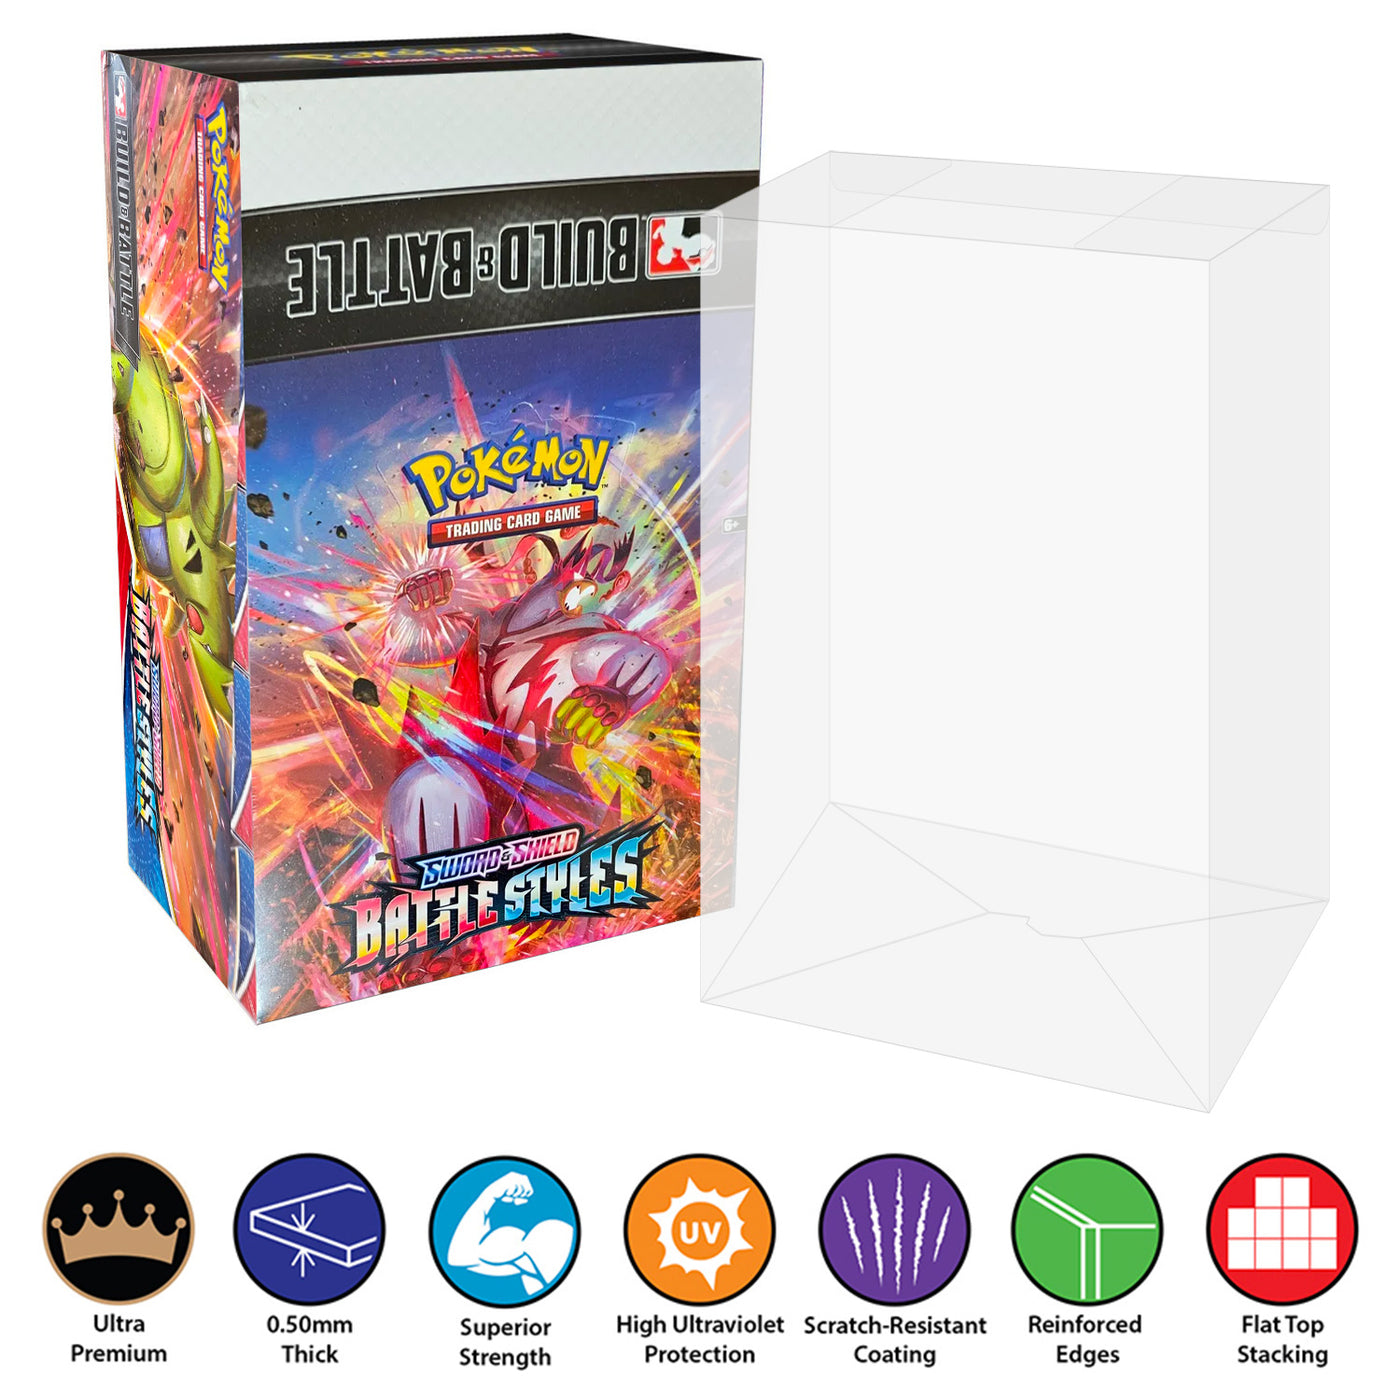 POKEMON TCG Build & Battle Full Case Box Protectors (50mm thick, UV & Scratch Resistant) 10.5h X 6w X 4.25d on The Protector Guide App by Display Geek